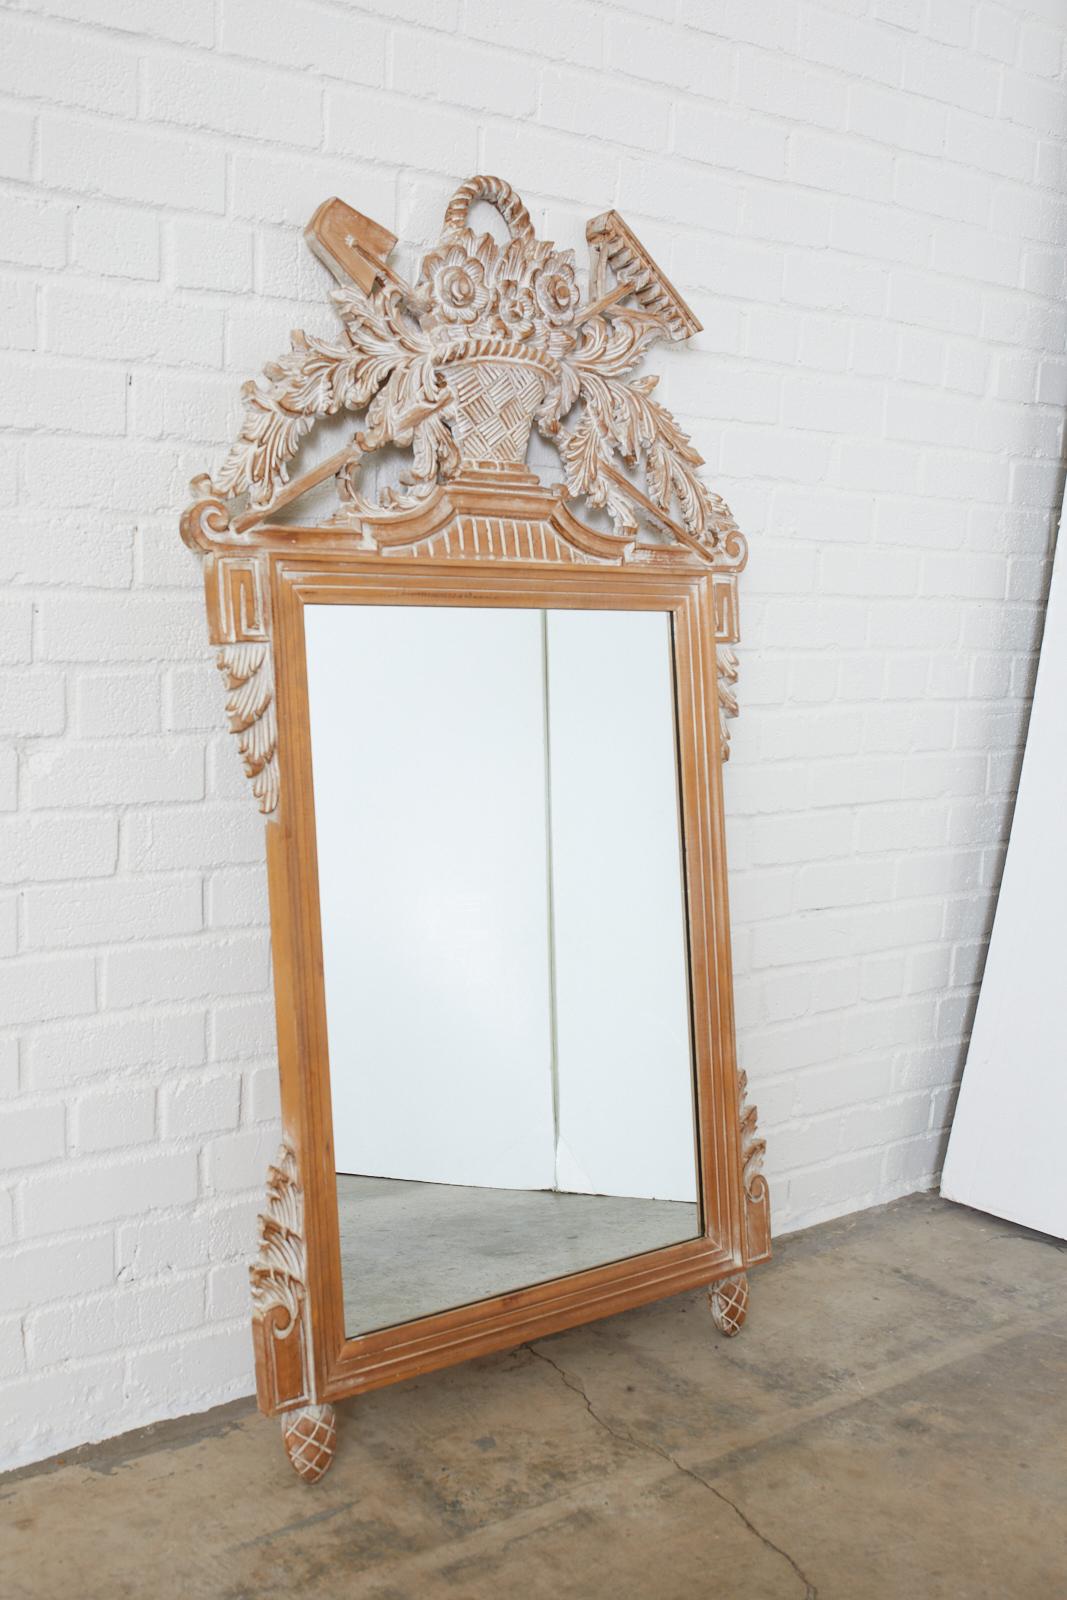 Hand carved oak wall mirror with a garden motif featuring a basket of flowers with cascading acanthus leaves and garden tools made in the Louis XVI style. Sits on pinecone feet with foliate accents on each corner. Has a white washed finish.
 